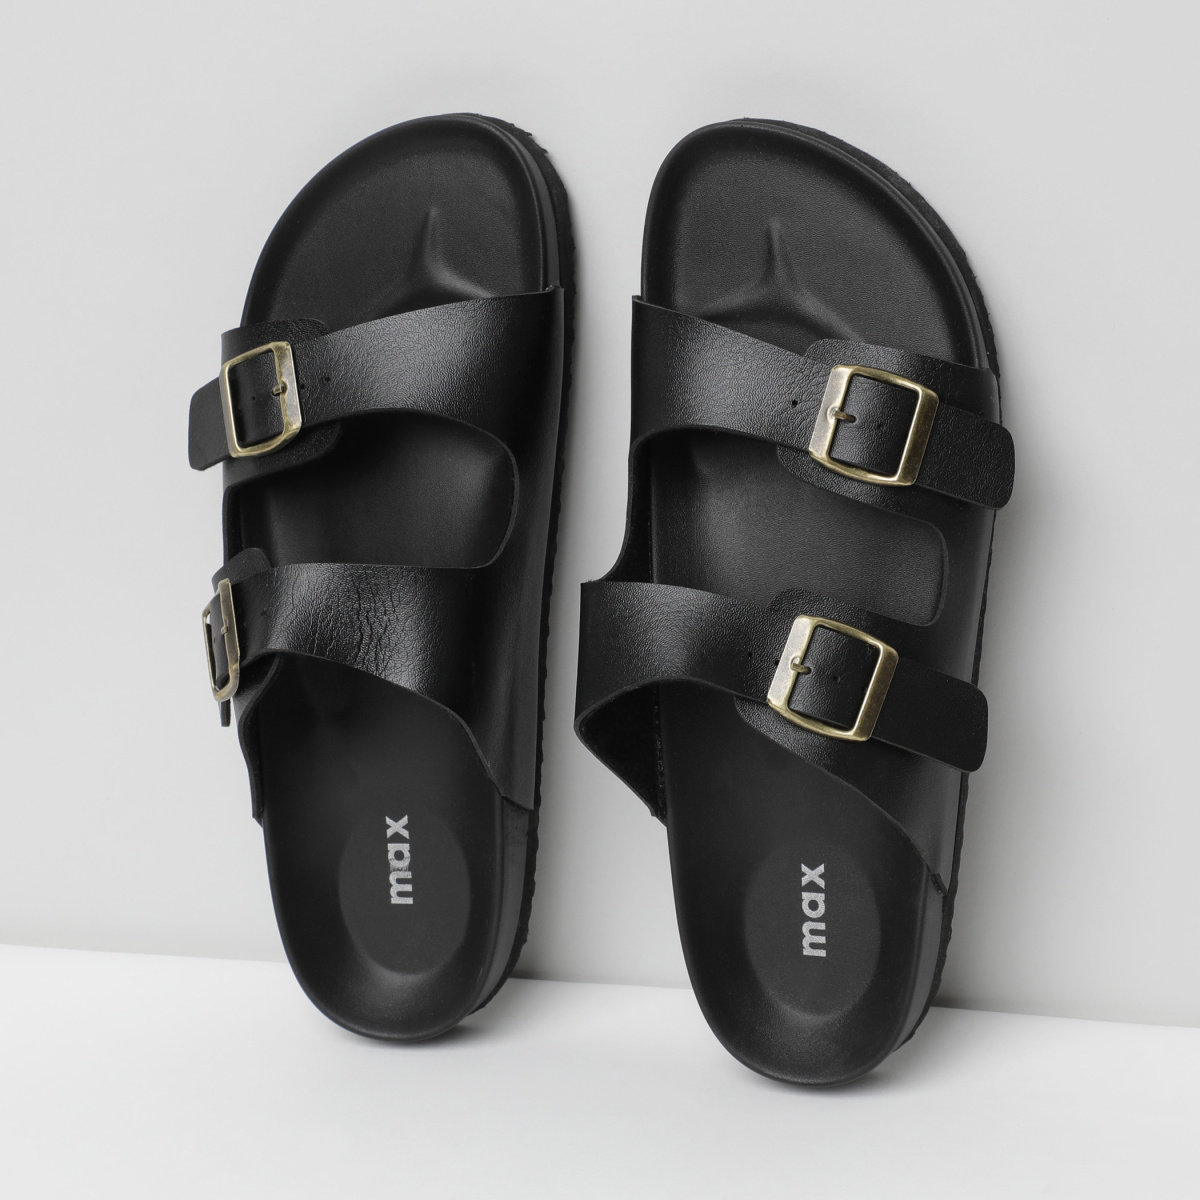 MAX Textured Flat Sandals with Buckle Closure